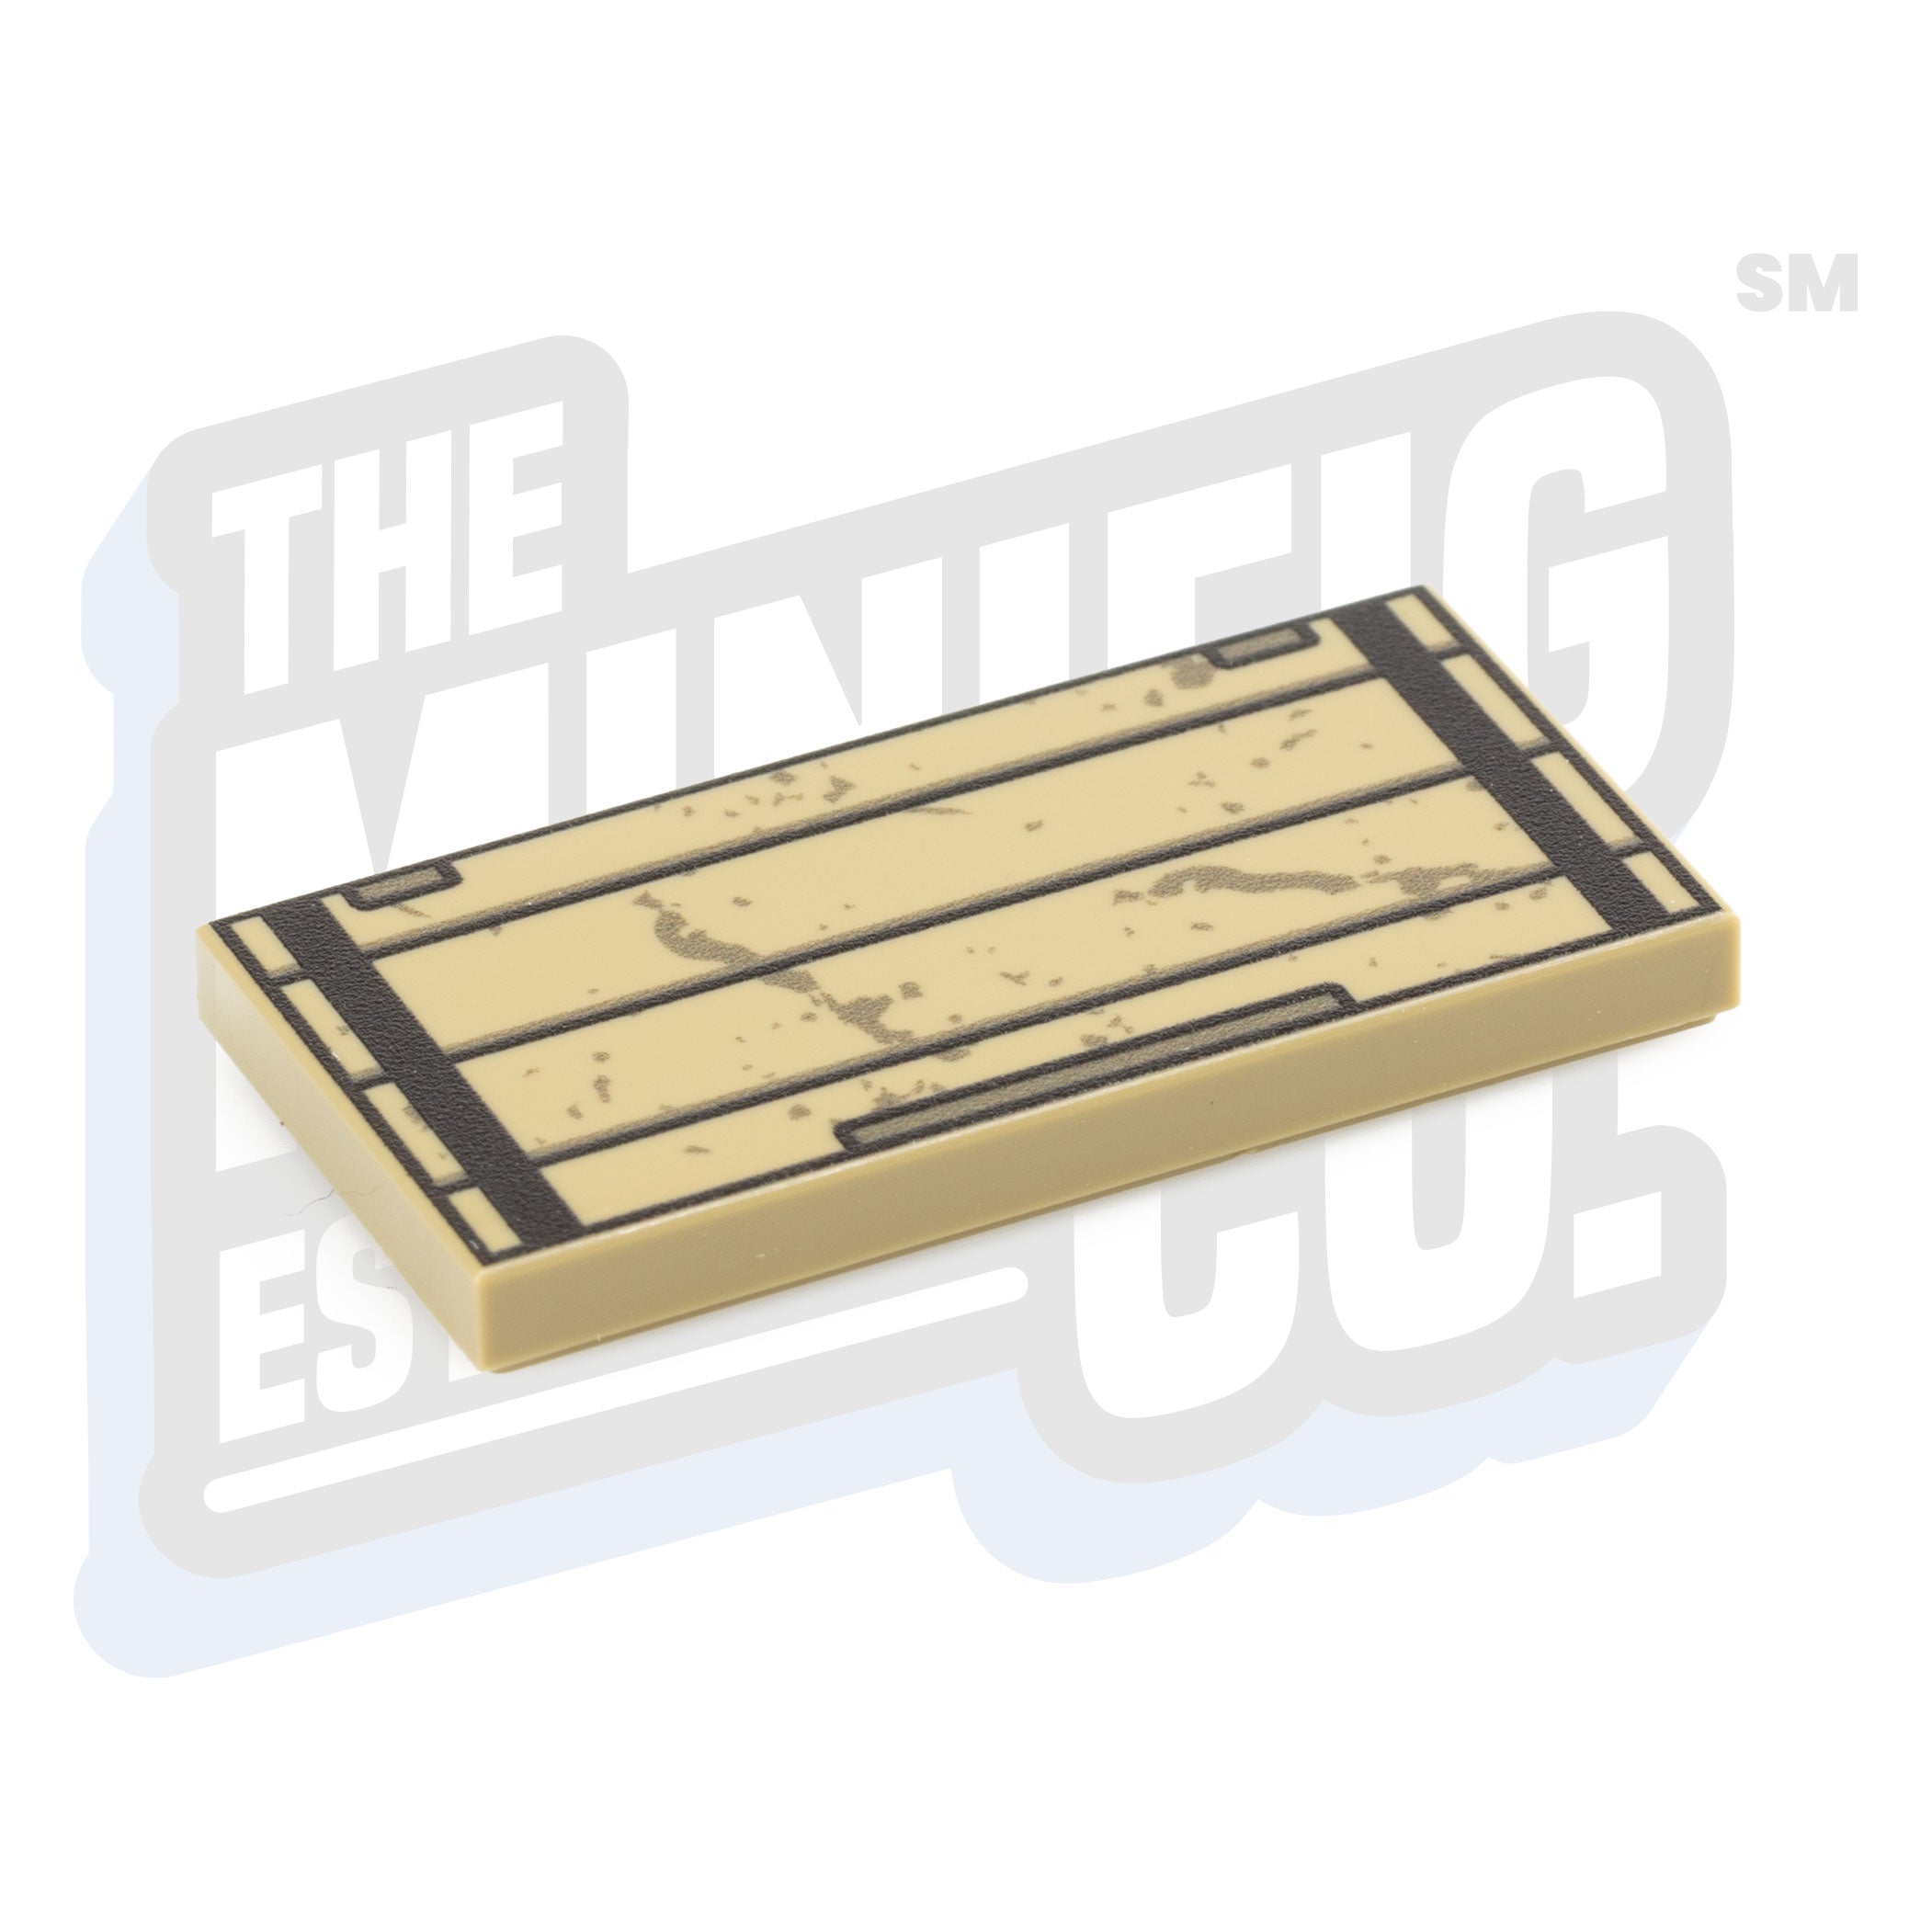 Crate Lid Tile (2x4) - The Minifig Co.